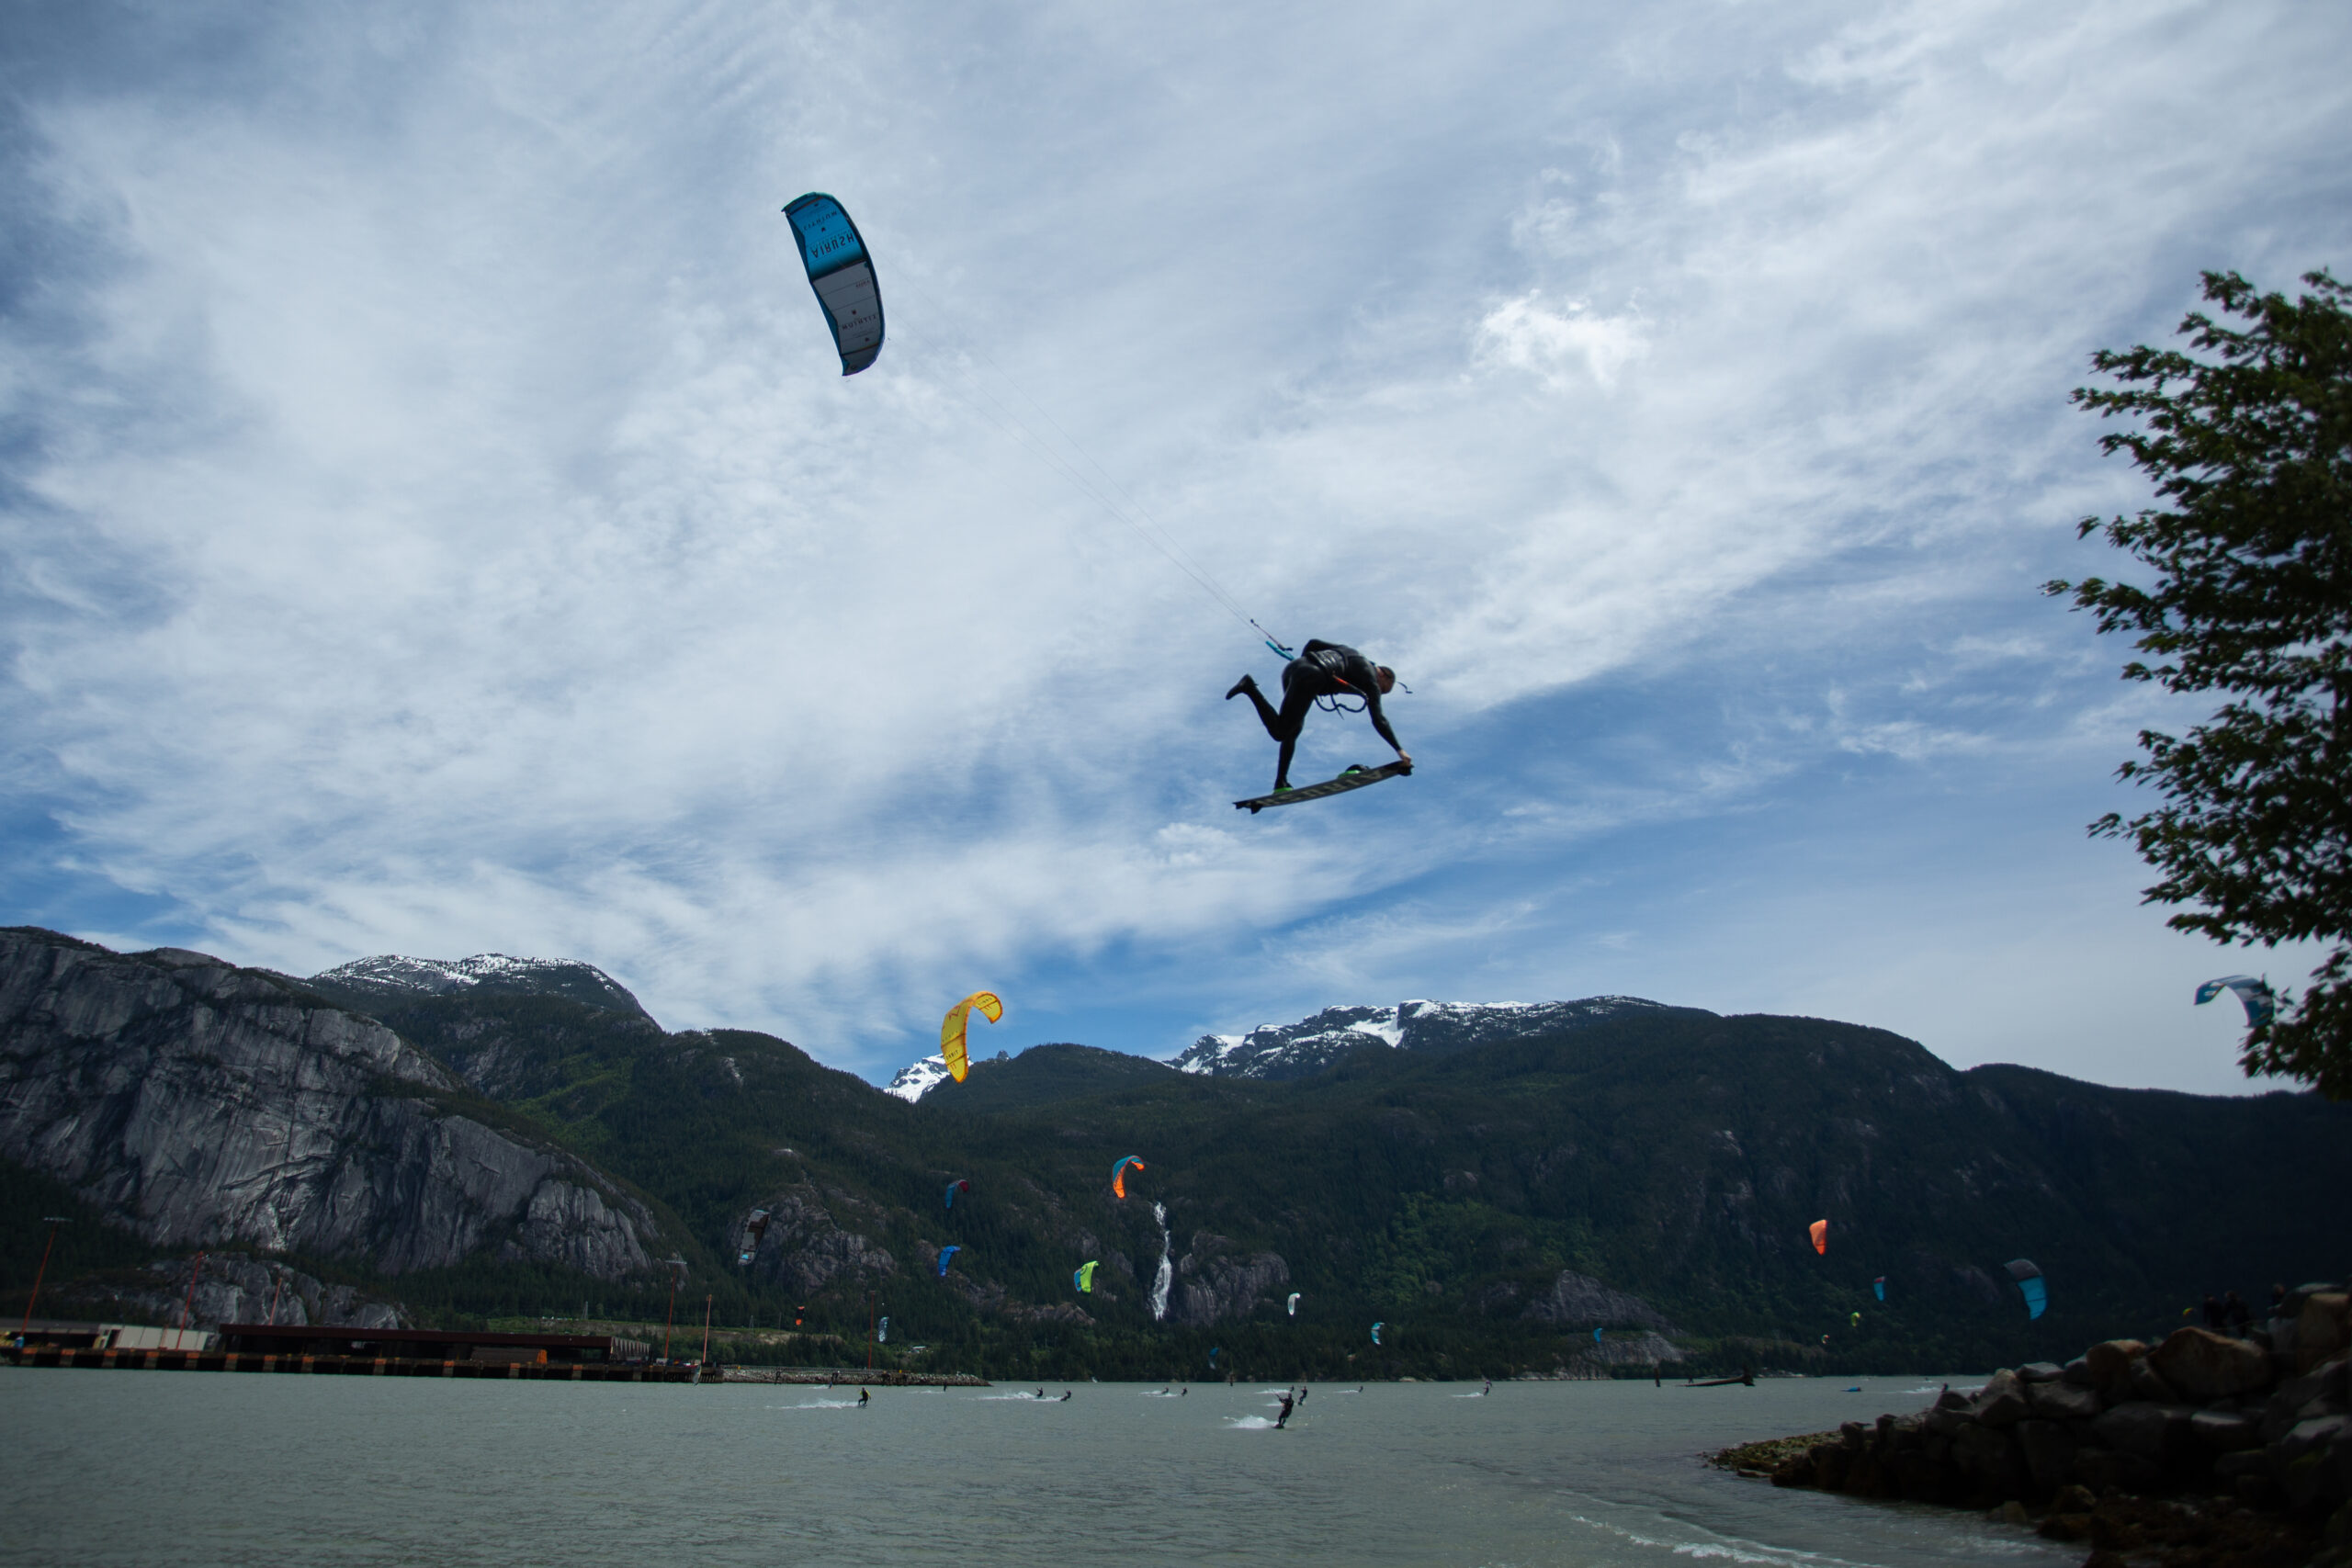 Squamish River: The Squamish River Windsports Society purchased the boat on the left to access Spit Island. President Sean Millington said members came to see the change wasn’t as disruptive as they had worried. Photo: Jesse Winter / The Narwhal